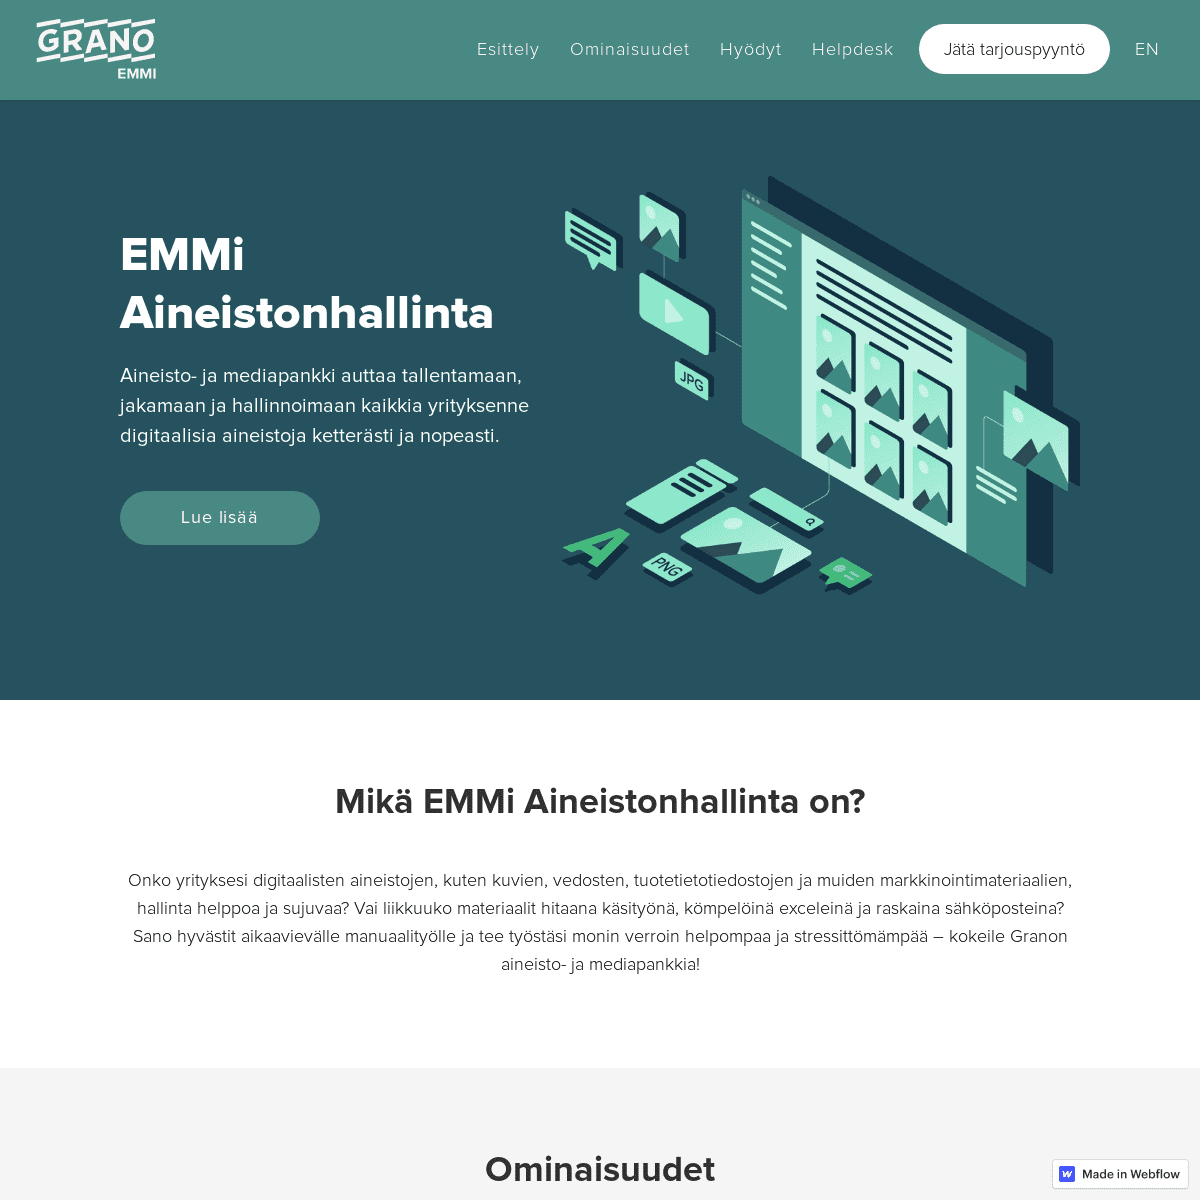 A complete backup of https://emmi.fi